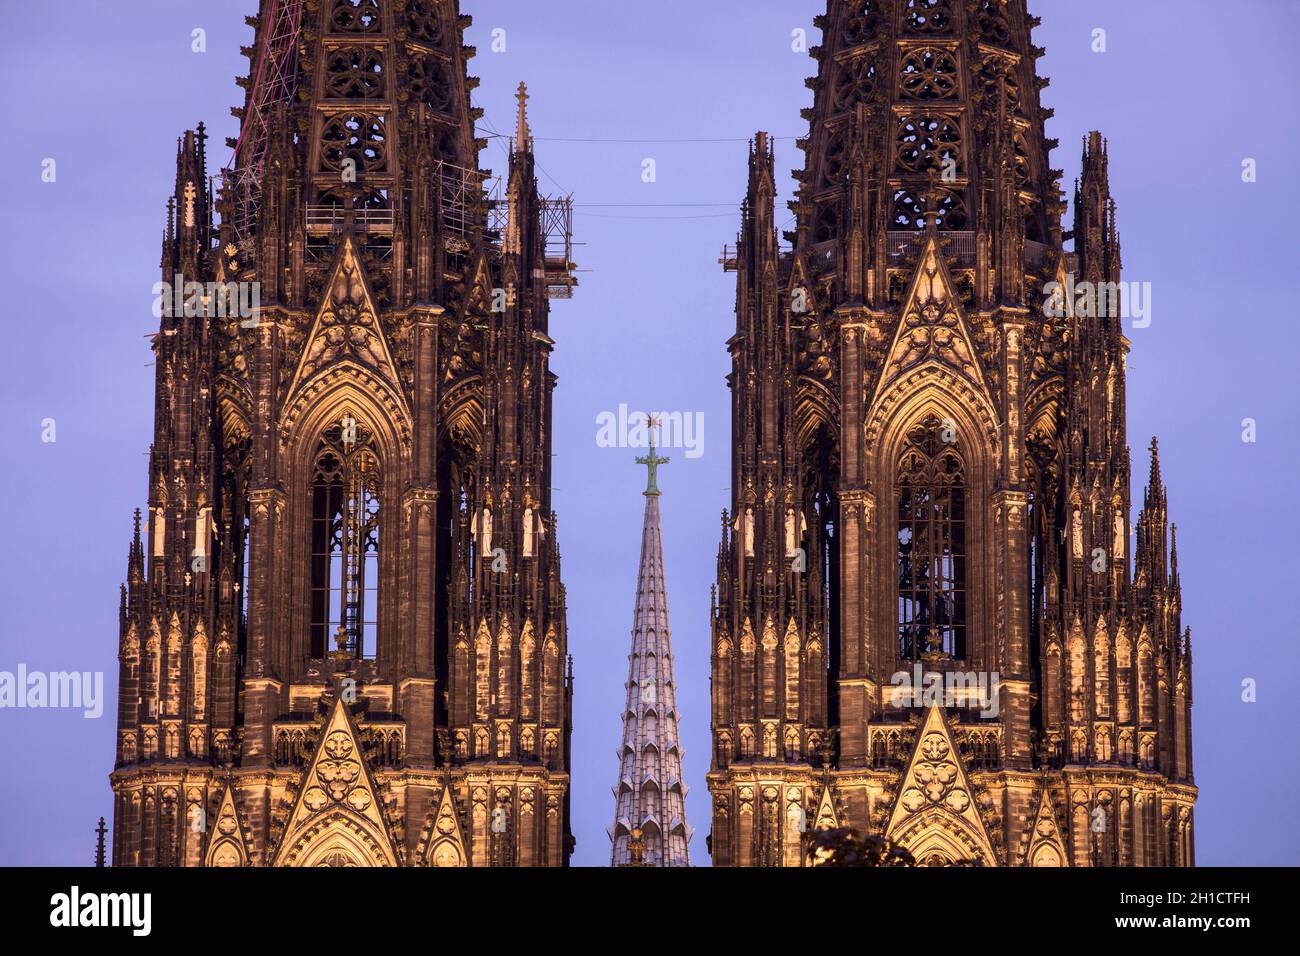 the west facade of the cathedral, Cologne, Germany.  die Westfassade des Doms, Koeln, Deutschland. Stock Photo